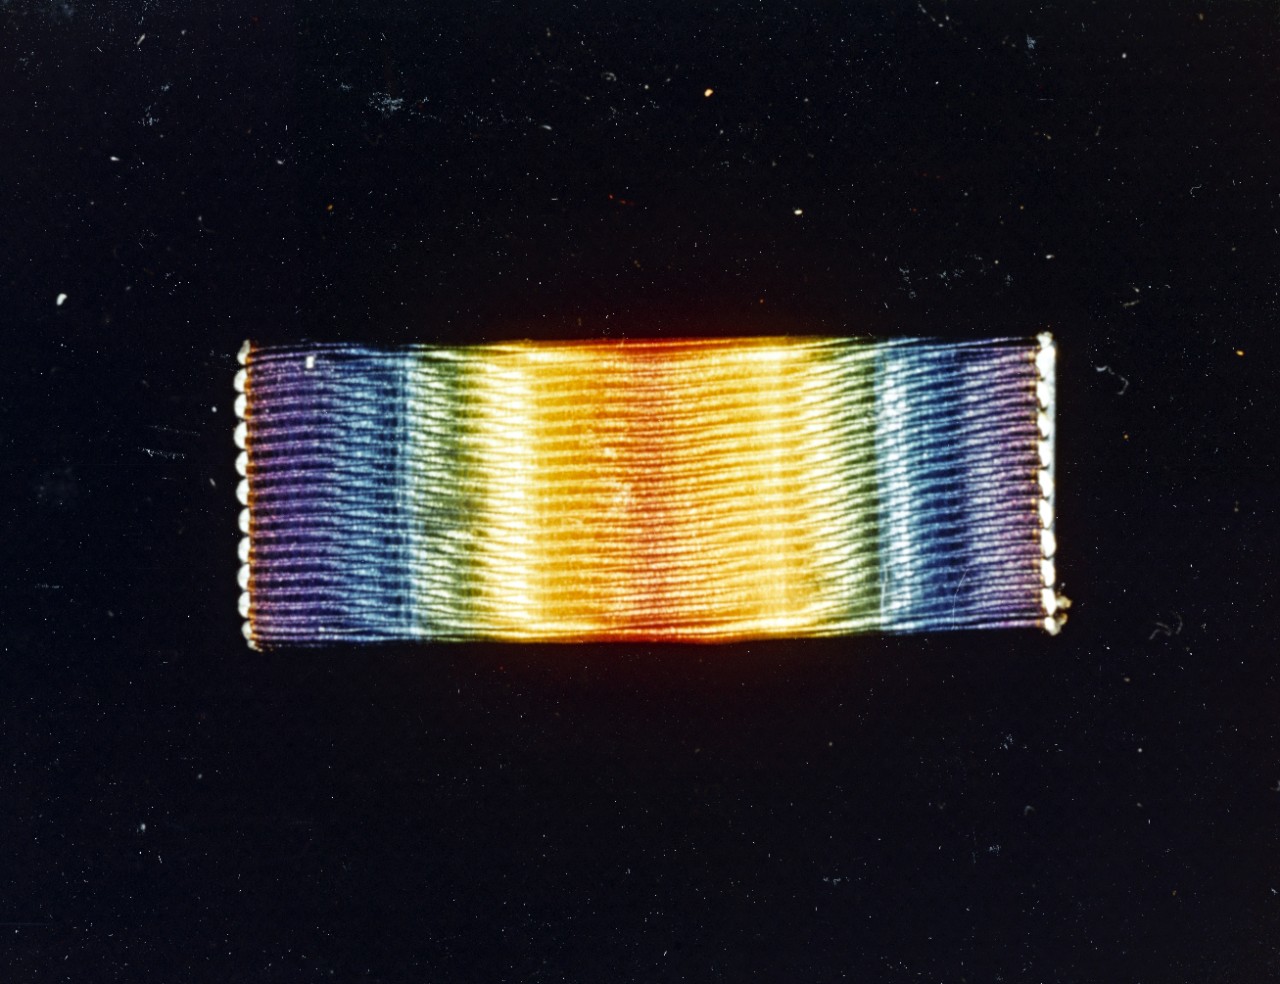 Service Ribbon for the Victory Medal